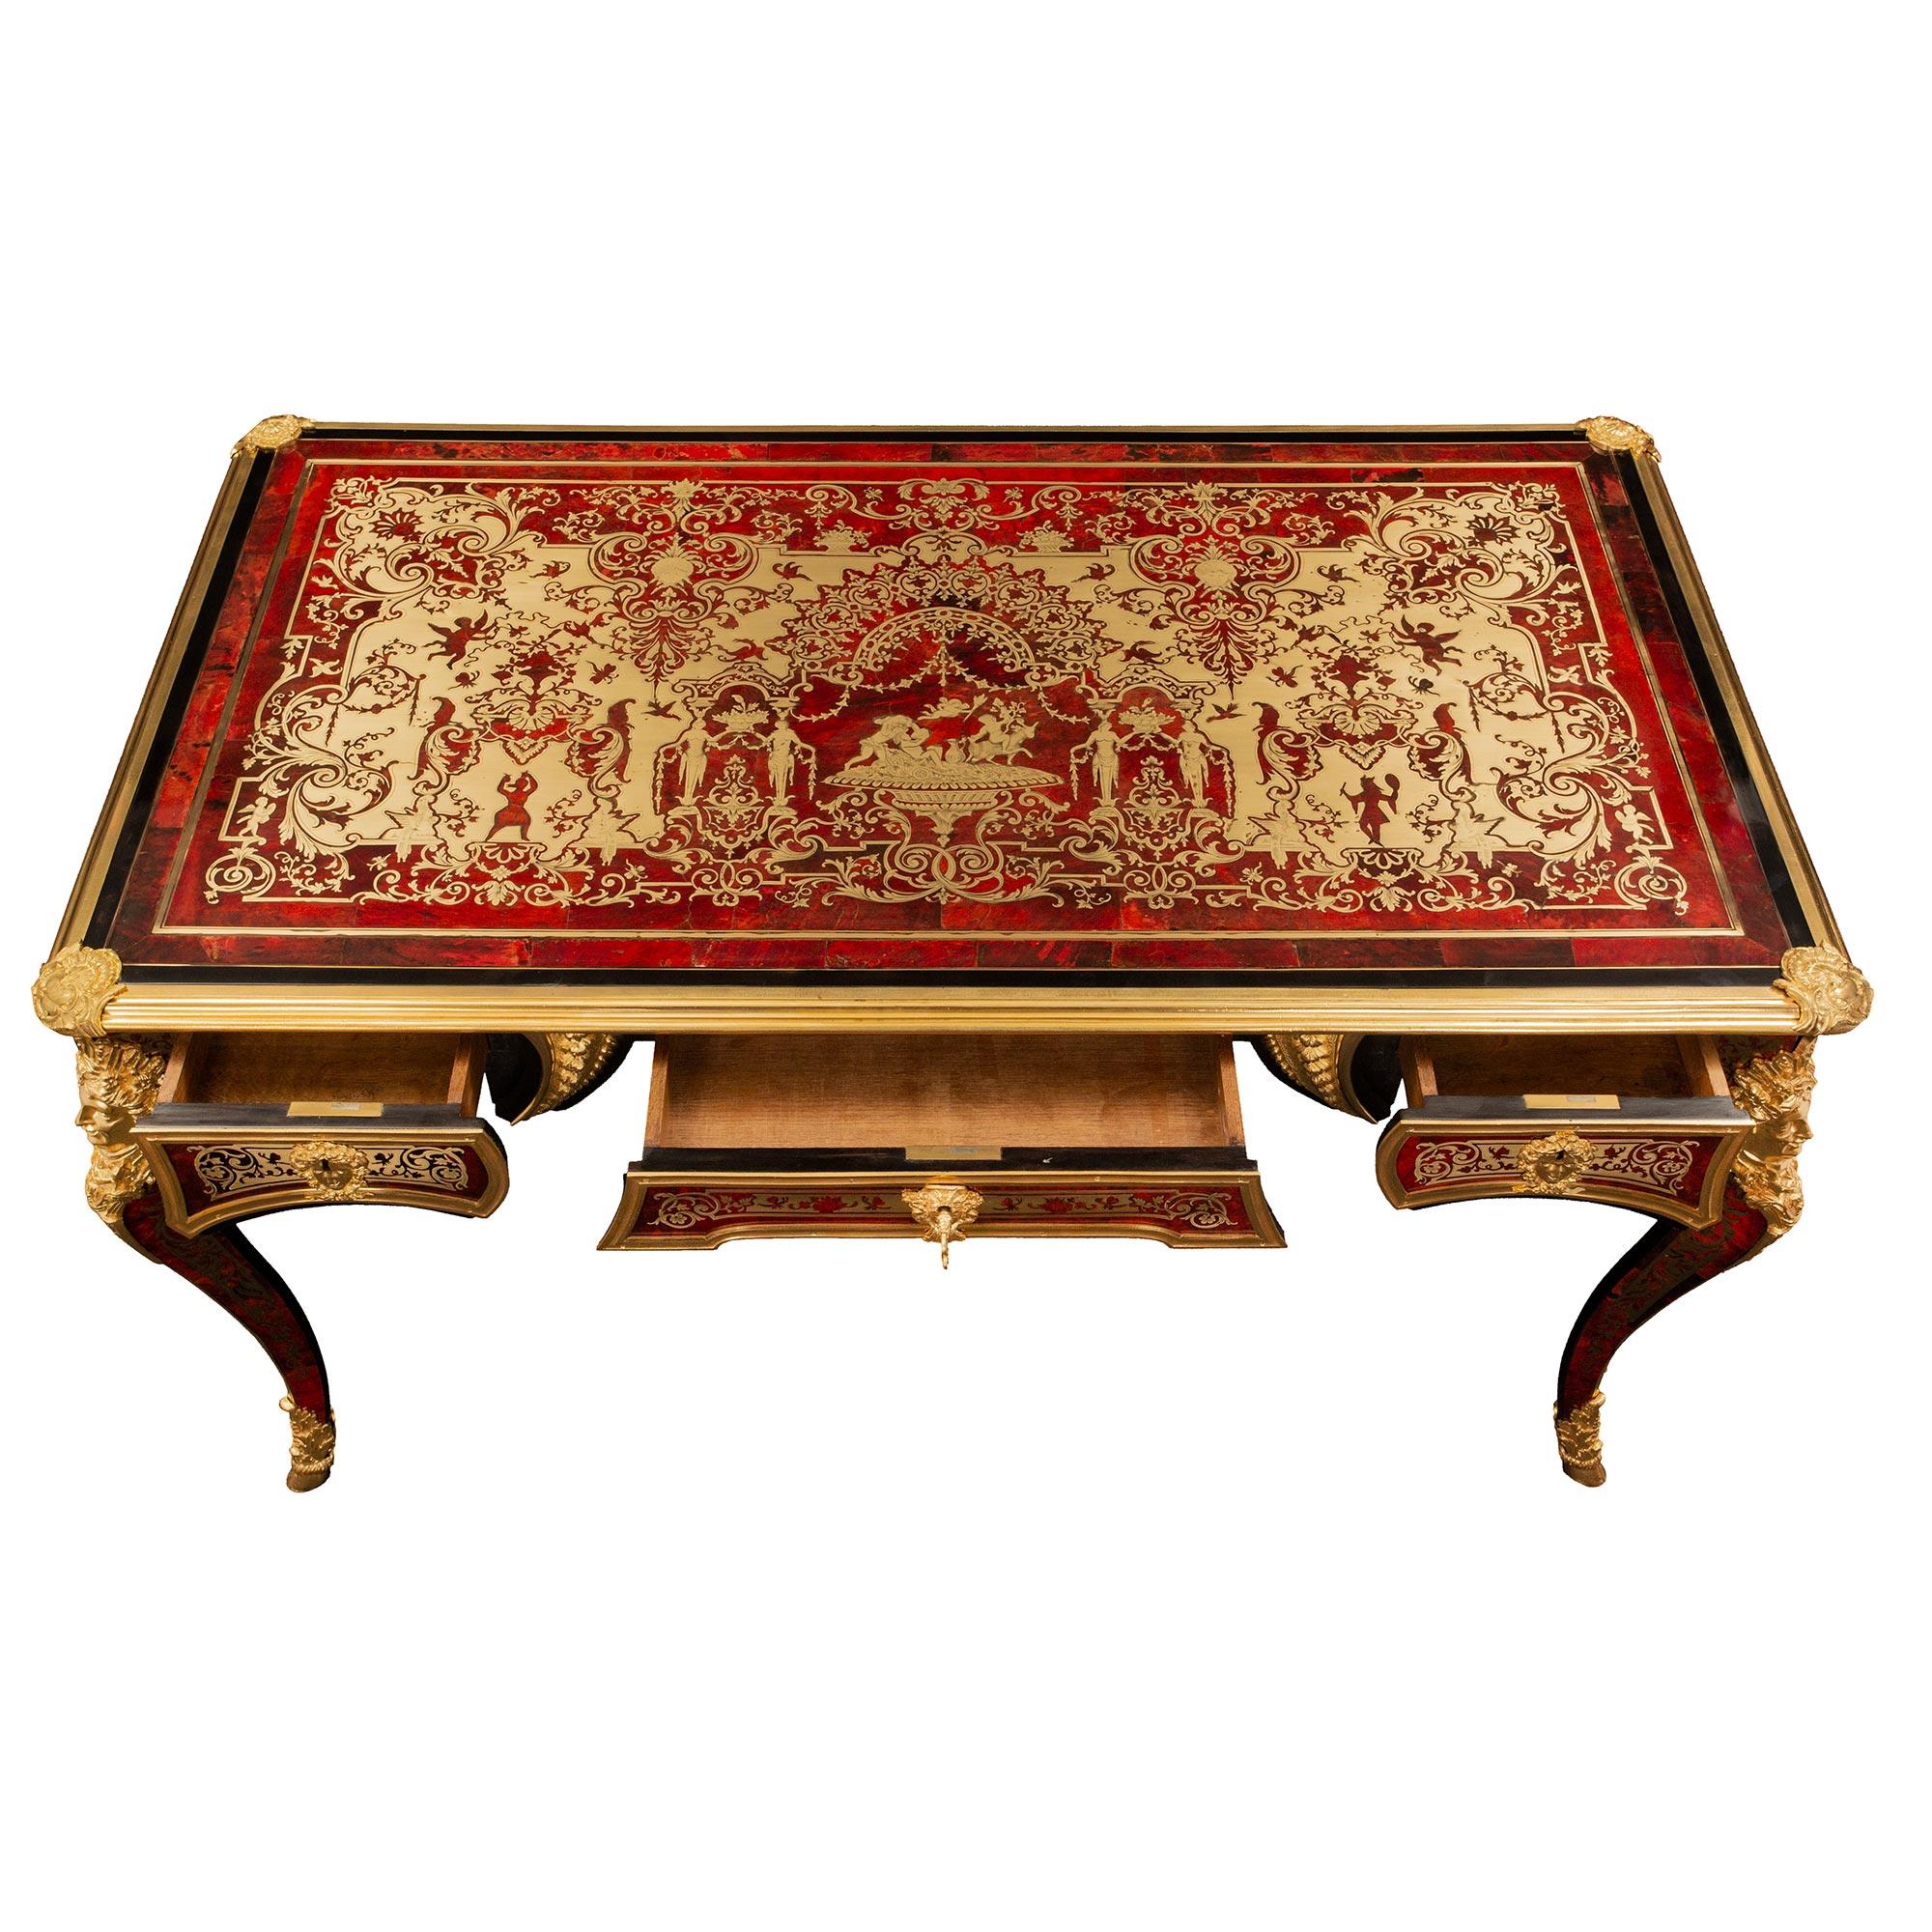 A spectacular French 19th century Louis XV style Napoleon III period brass inlaid, tortoise shell and ormolu Boulle Bureau Plat stamped Befort Jeune. The desk is raised by beautiful cabriole legs with stunning wrap around hoof feet ormolu sabots